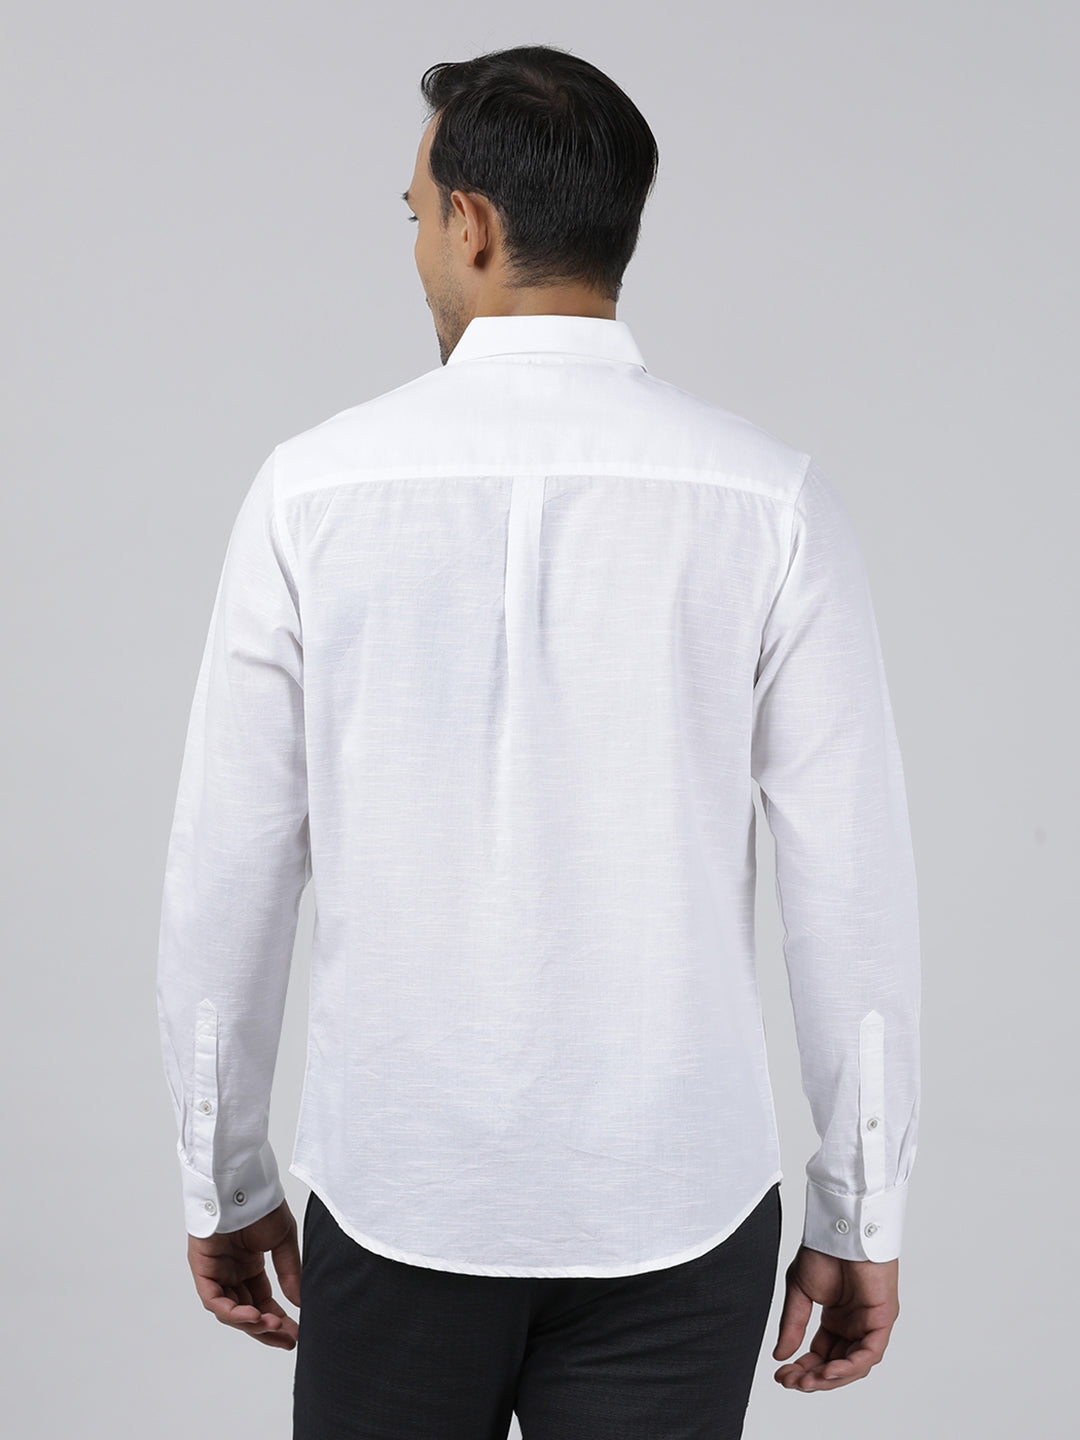 Casual White Full Sleeve Comfort Fit Solid Shirt with Collar for Men